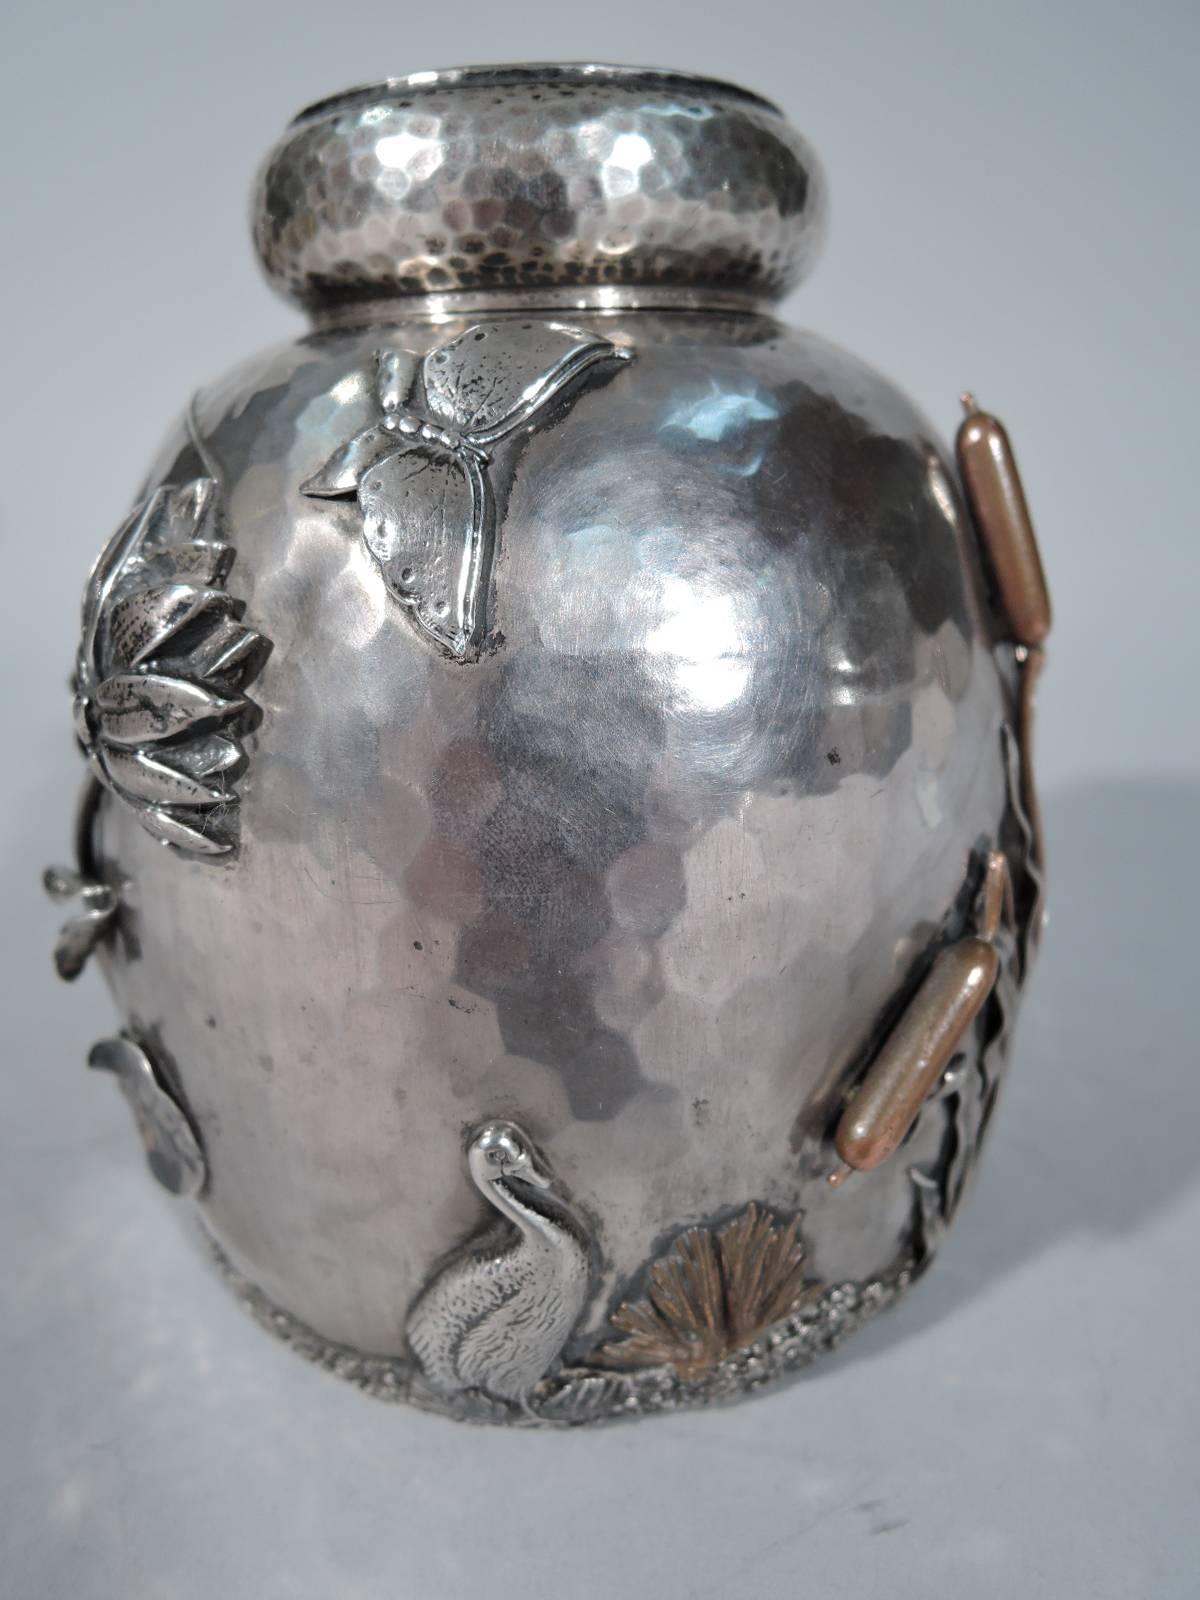 American Fabulous Japonesque Sterling Silver and Mixed Metal Tea Caddy by Gorham